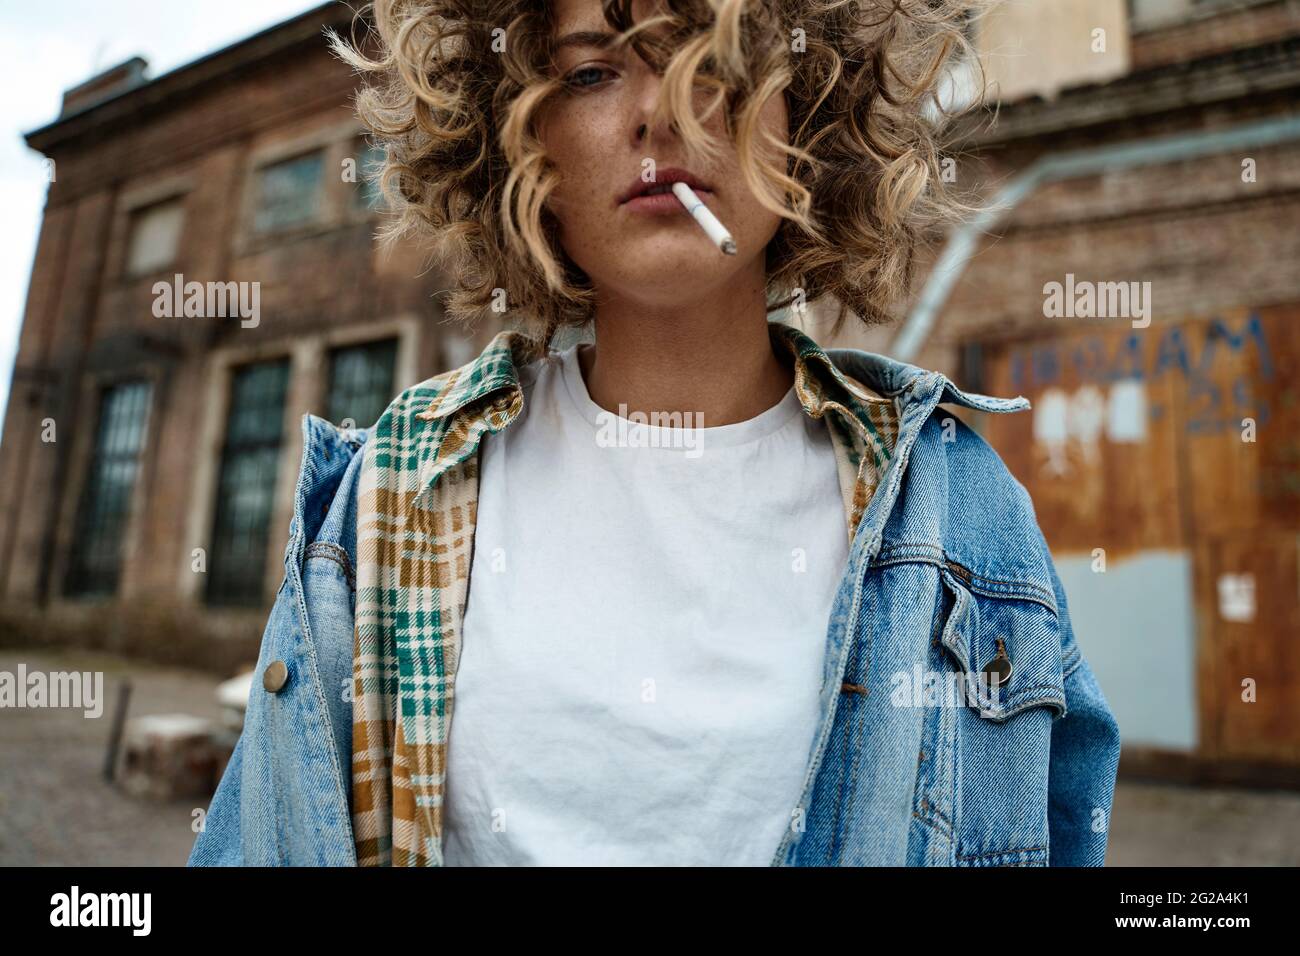 Stylish curly Woman standing and thoughtfully smoking in abandoned place looking at camera Stock Photo